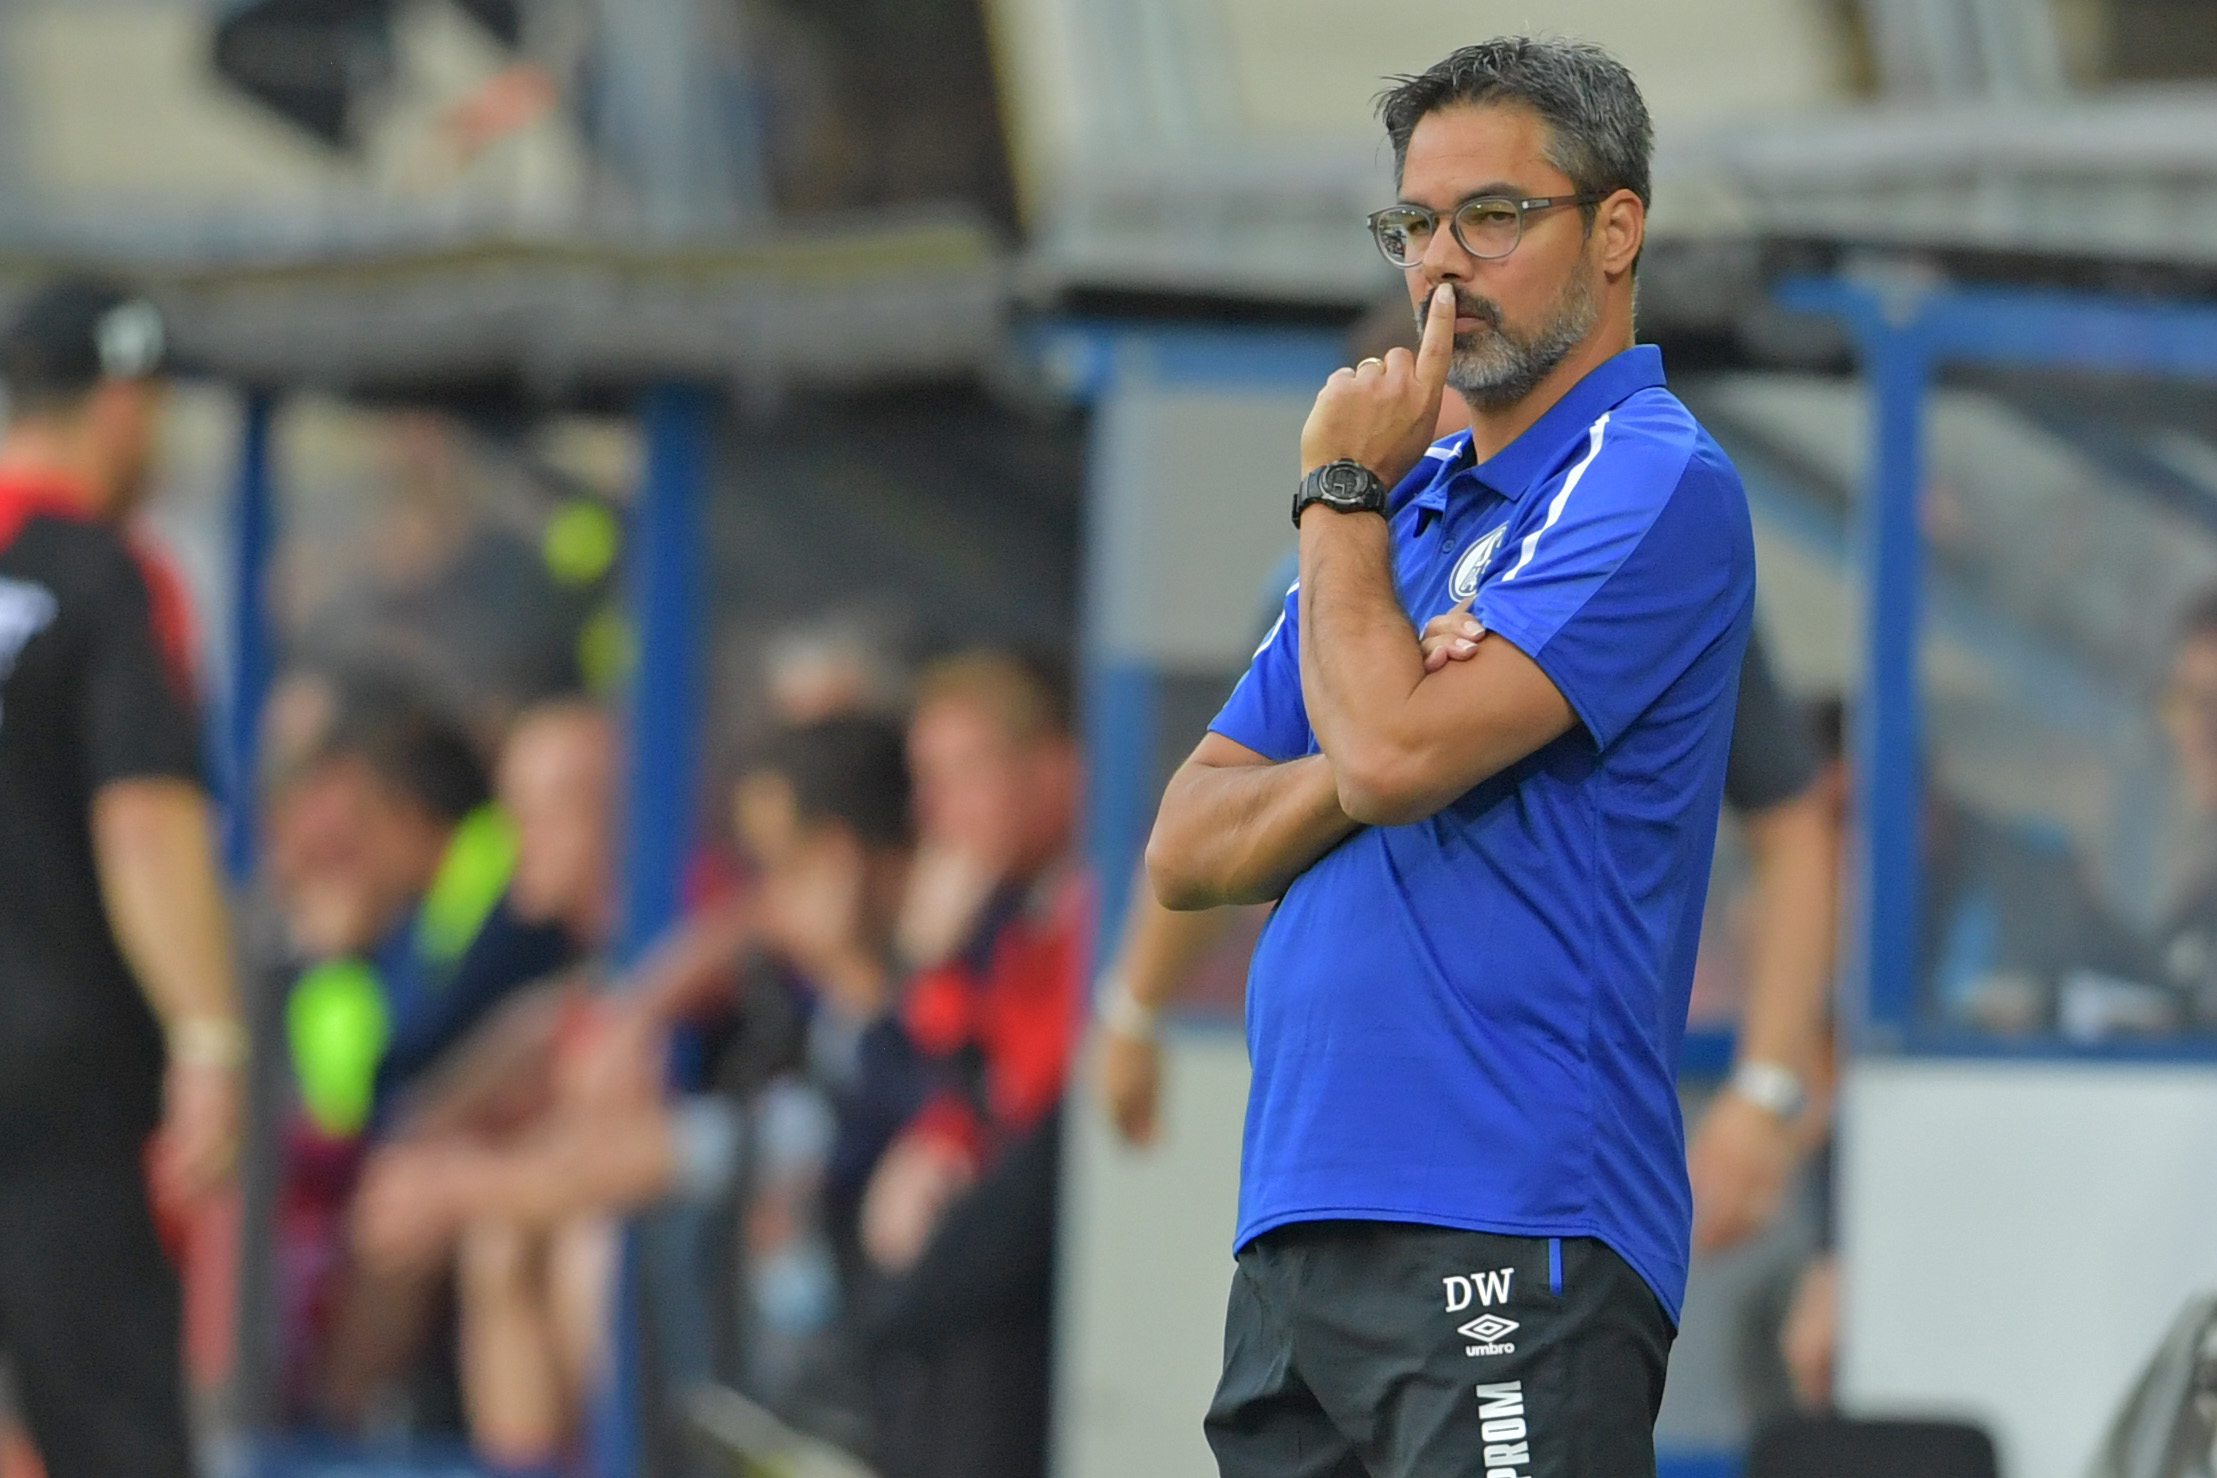 PADERBORN, GERMANY - SEPTEMBER 15: Head coach David Wagner of Schalke reacts during the Bundesliga match between SC Paderborn 07 and FC Schalke 04 at Benteler Arena on September 15, 2019 in Paderborn, Germany. (Photo by Thomas F. Starke/Bongarts/Getty Images)